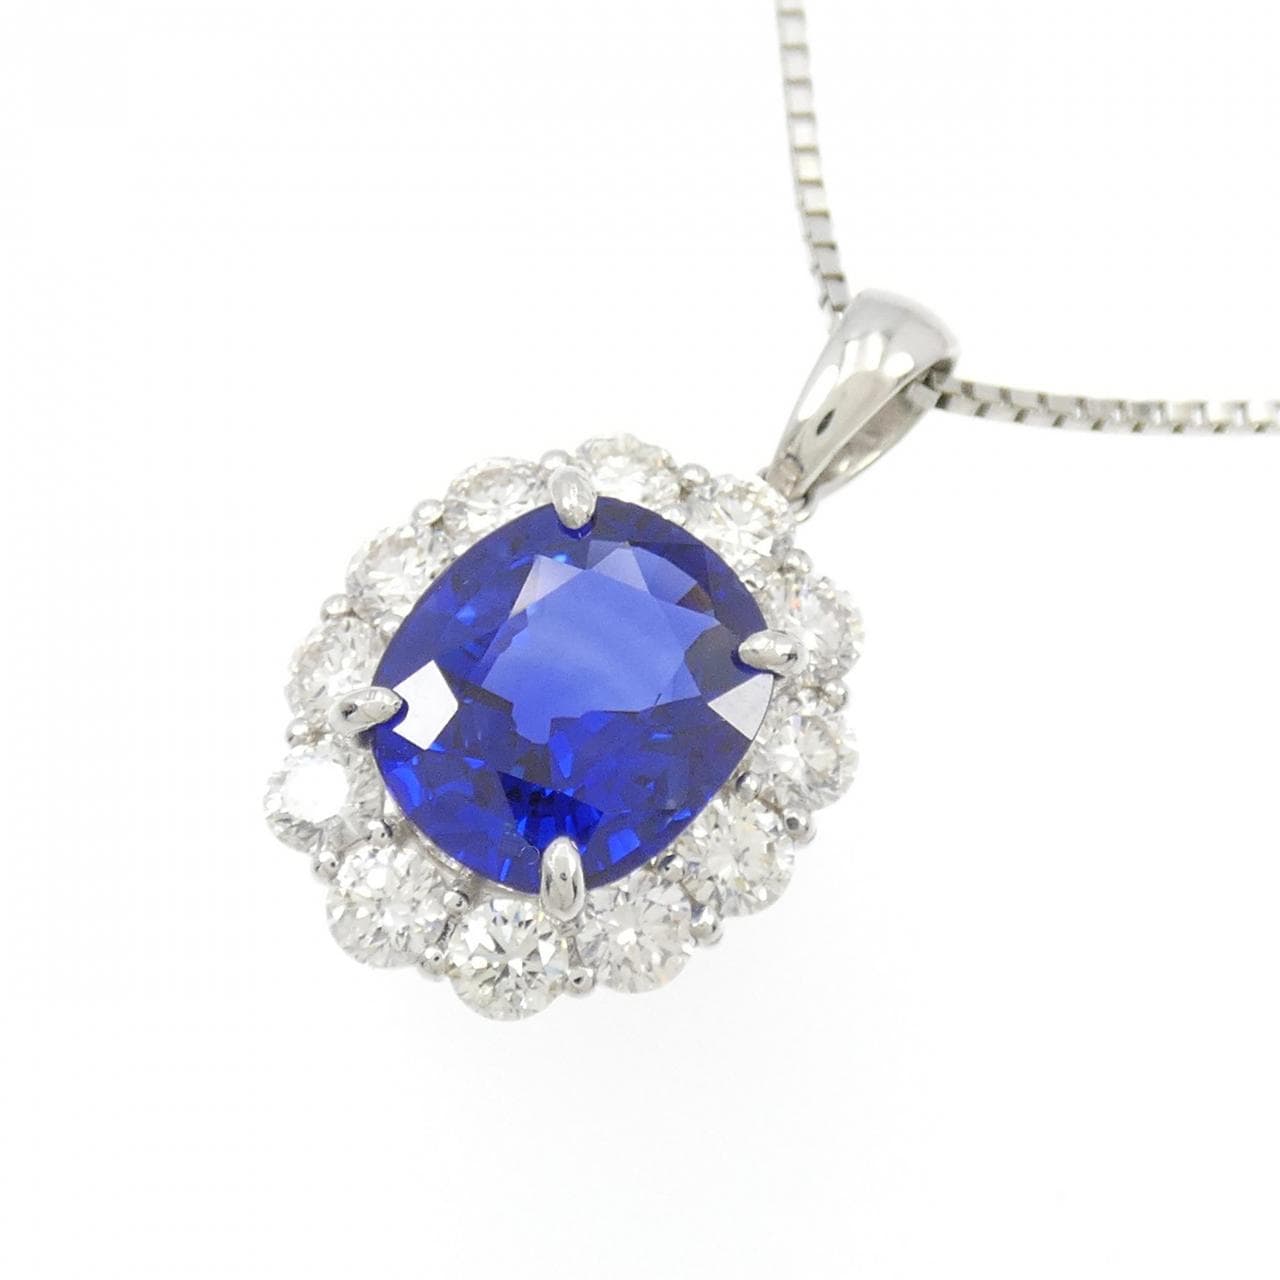 [Remake] PT Sapphire Necklace 4.68CT Made in Sri Lanka